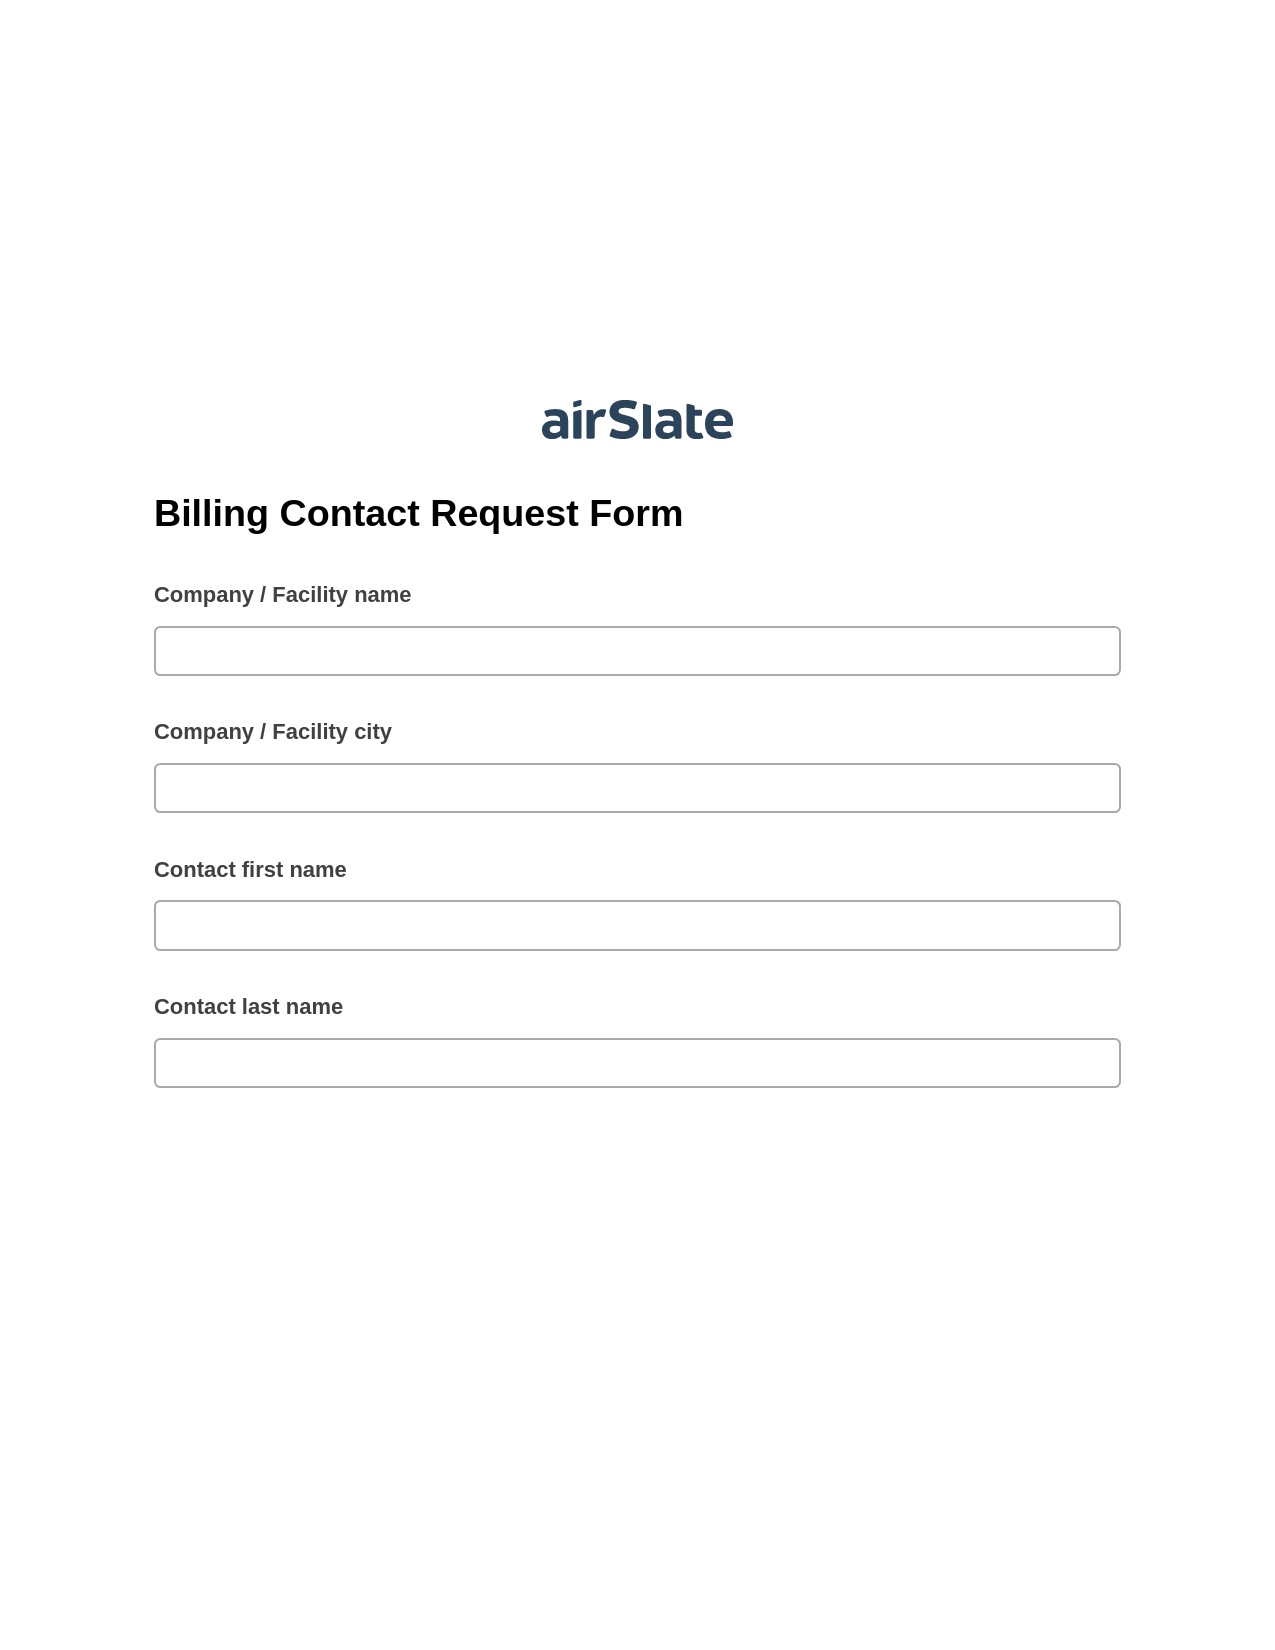 Billing Contact Request Form Pre-fill Dropdowns from Google Sheet Bot, Create MS Dynamics 365 Records Bot, Archive to SharePoint Folder Bot